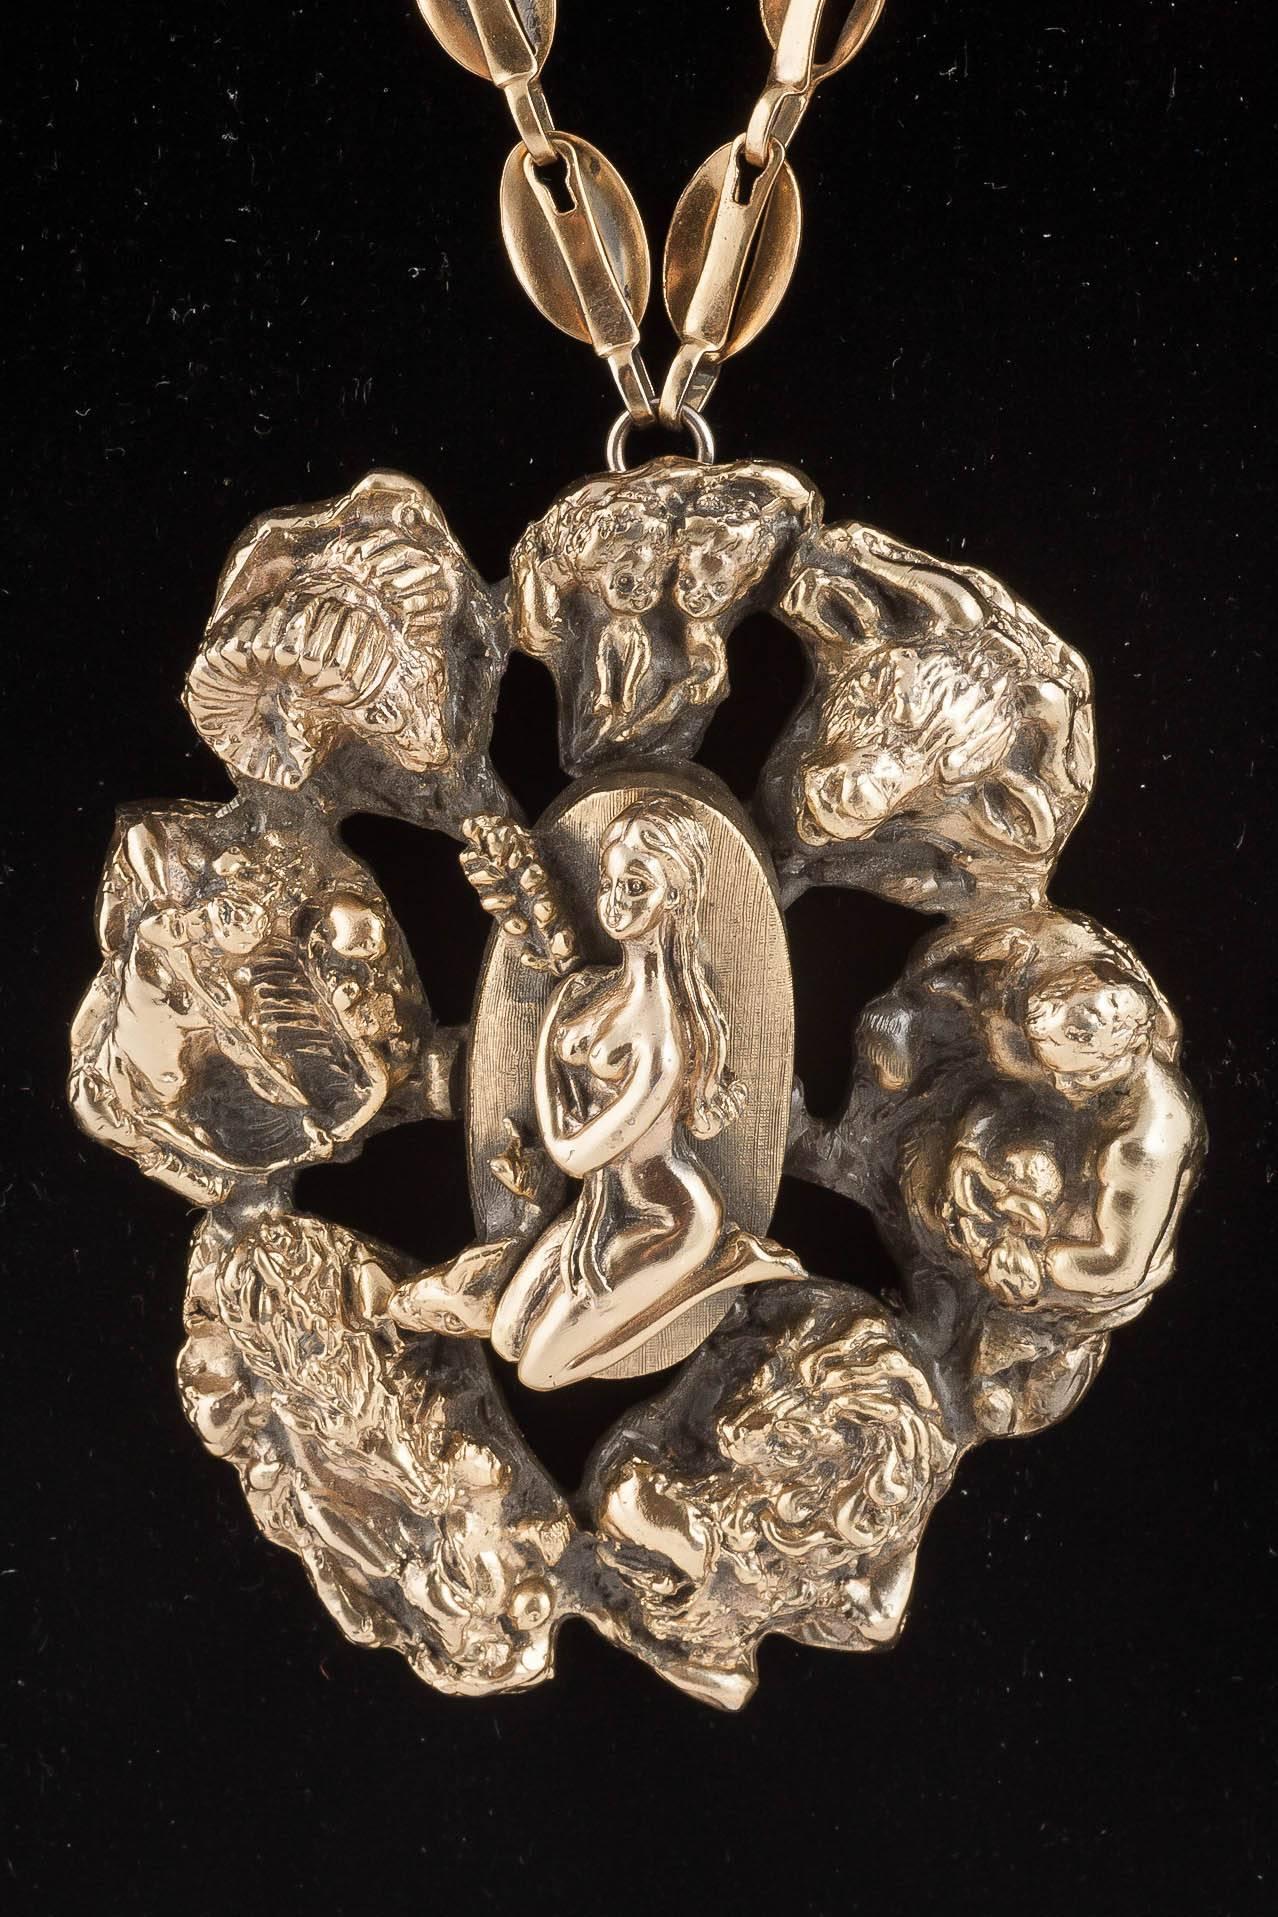 This is such a quirky piece. The zodiac series by Tortolani is one of his most famous lines. This piece encompasses most of the zodiac imagery into one fabulous pendant. Cast in solid pewter then gilded in a muted gilt with blackened shading, it is